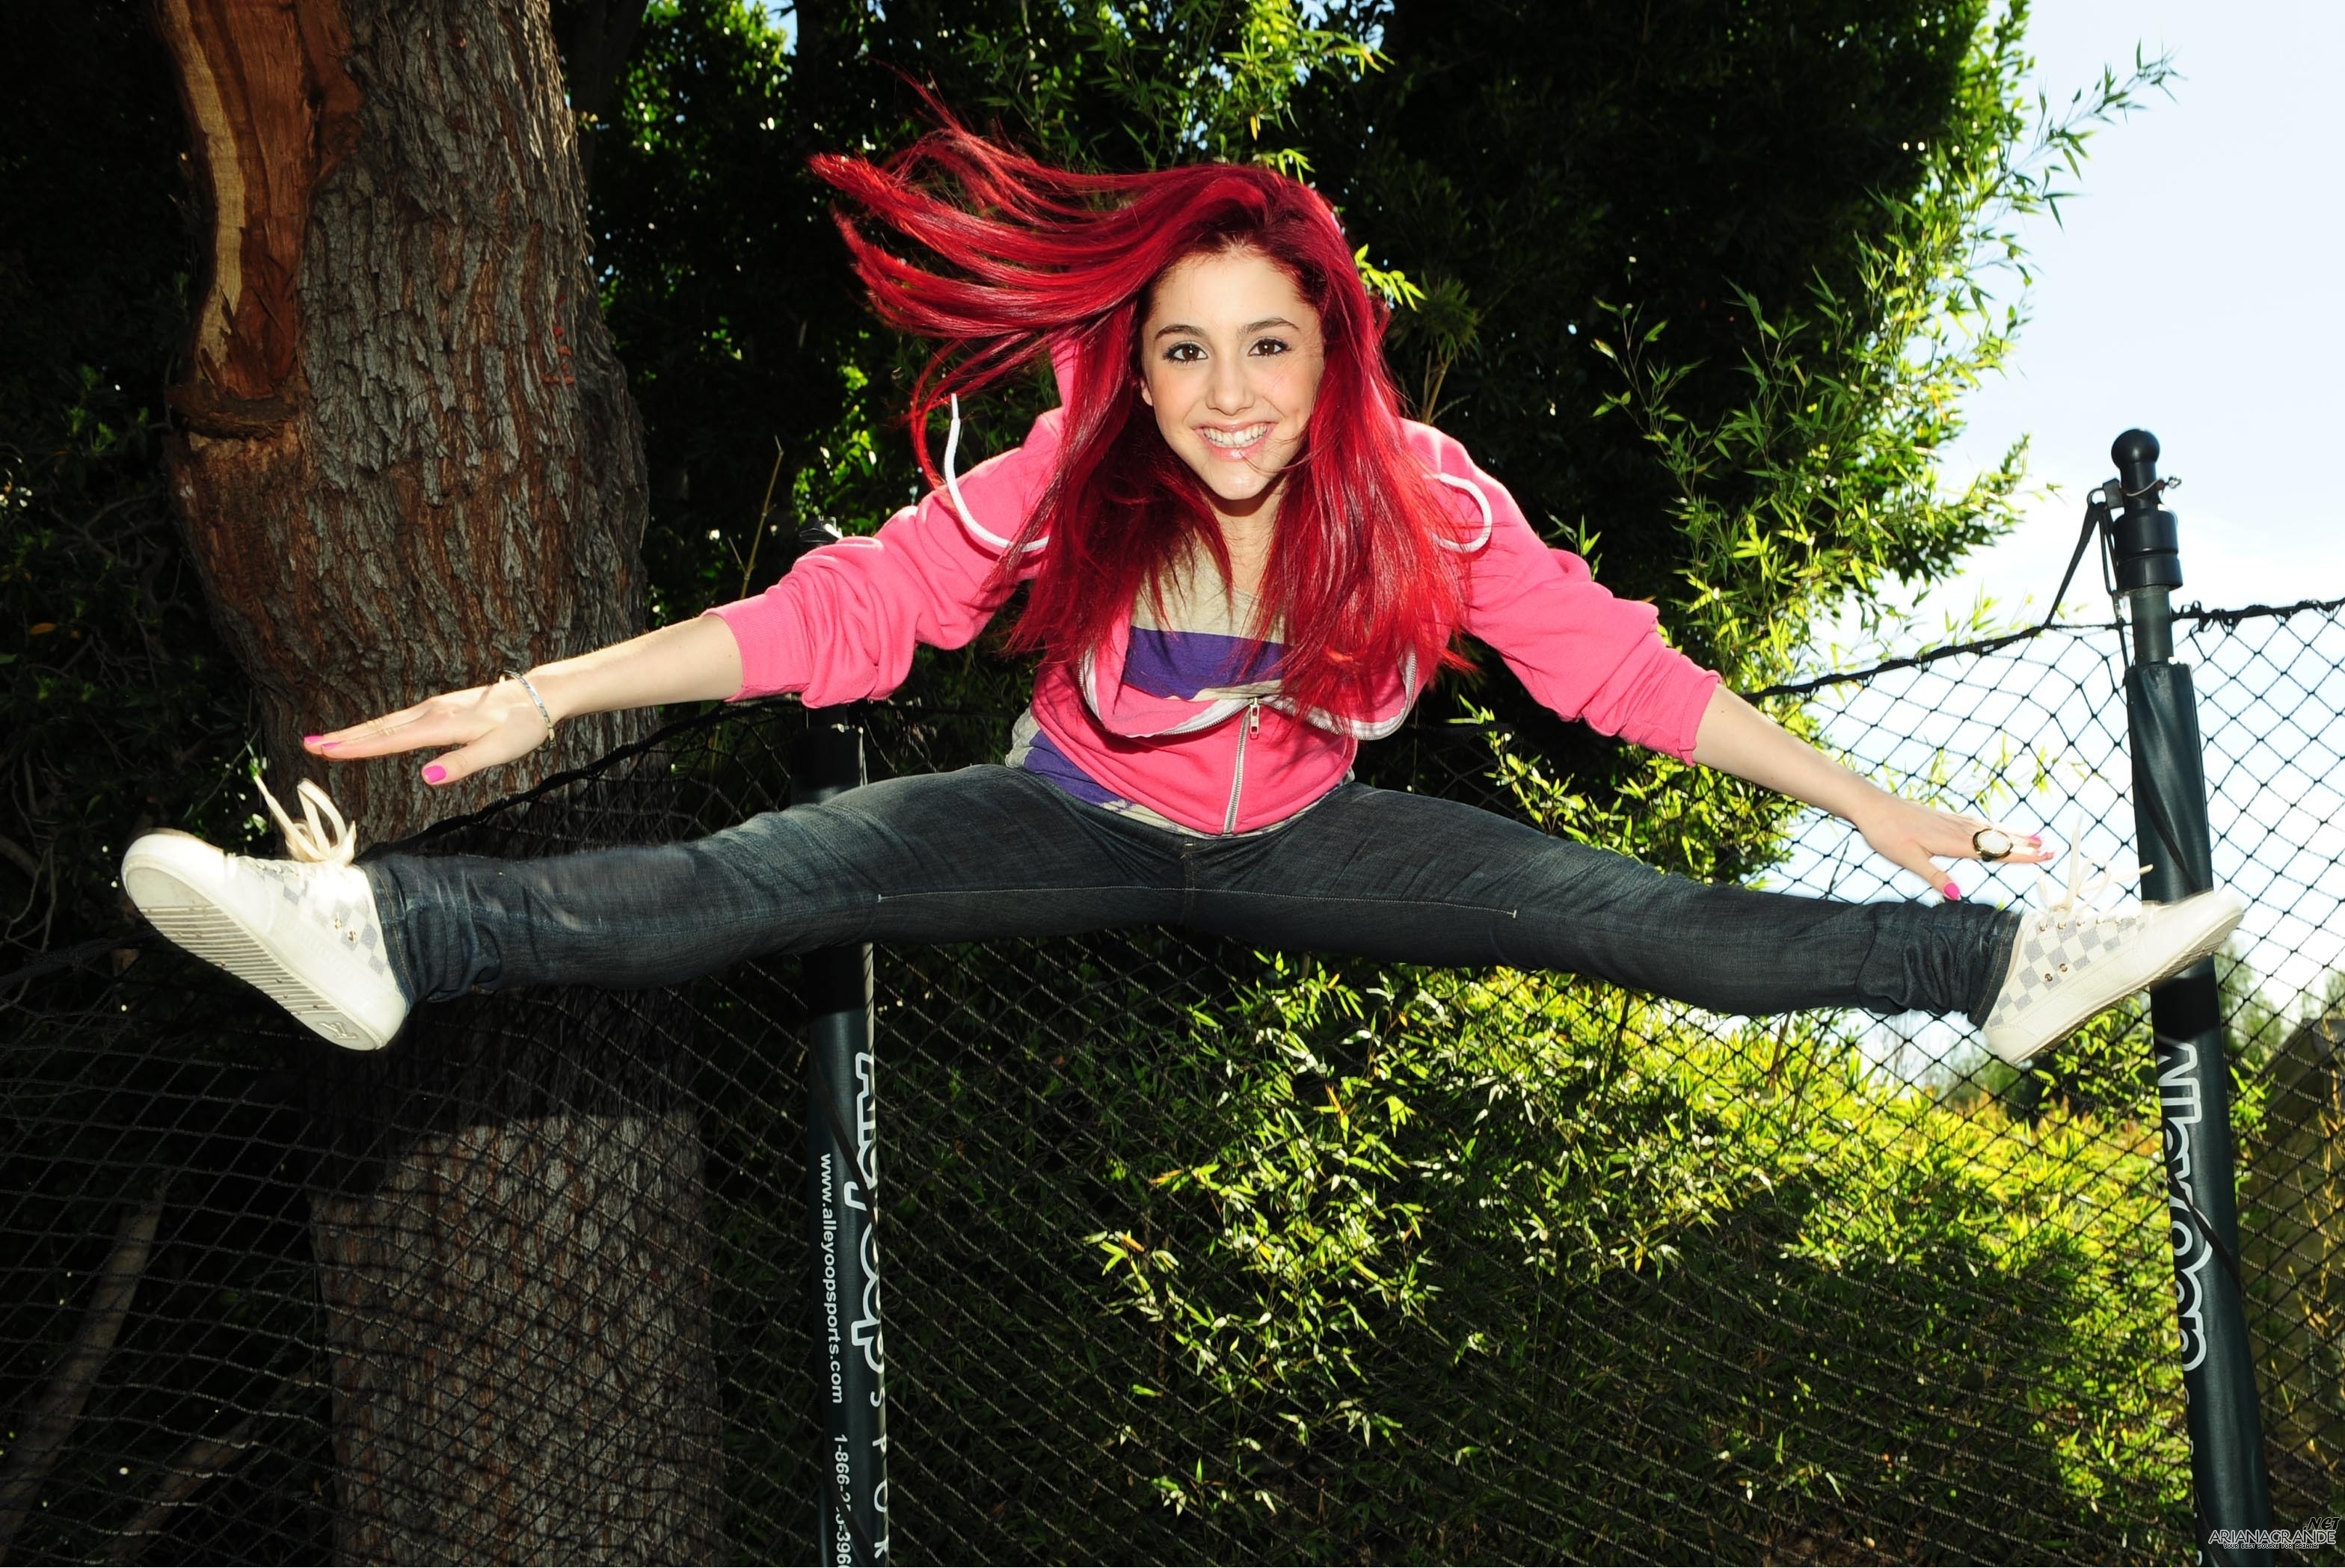 People 3136x2097 women model redhead long hair women outdoors jumping Ariana Grande singer stretching smiling sneakers jeans trees fence leaves